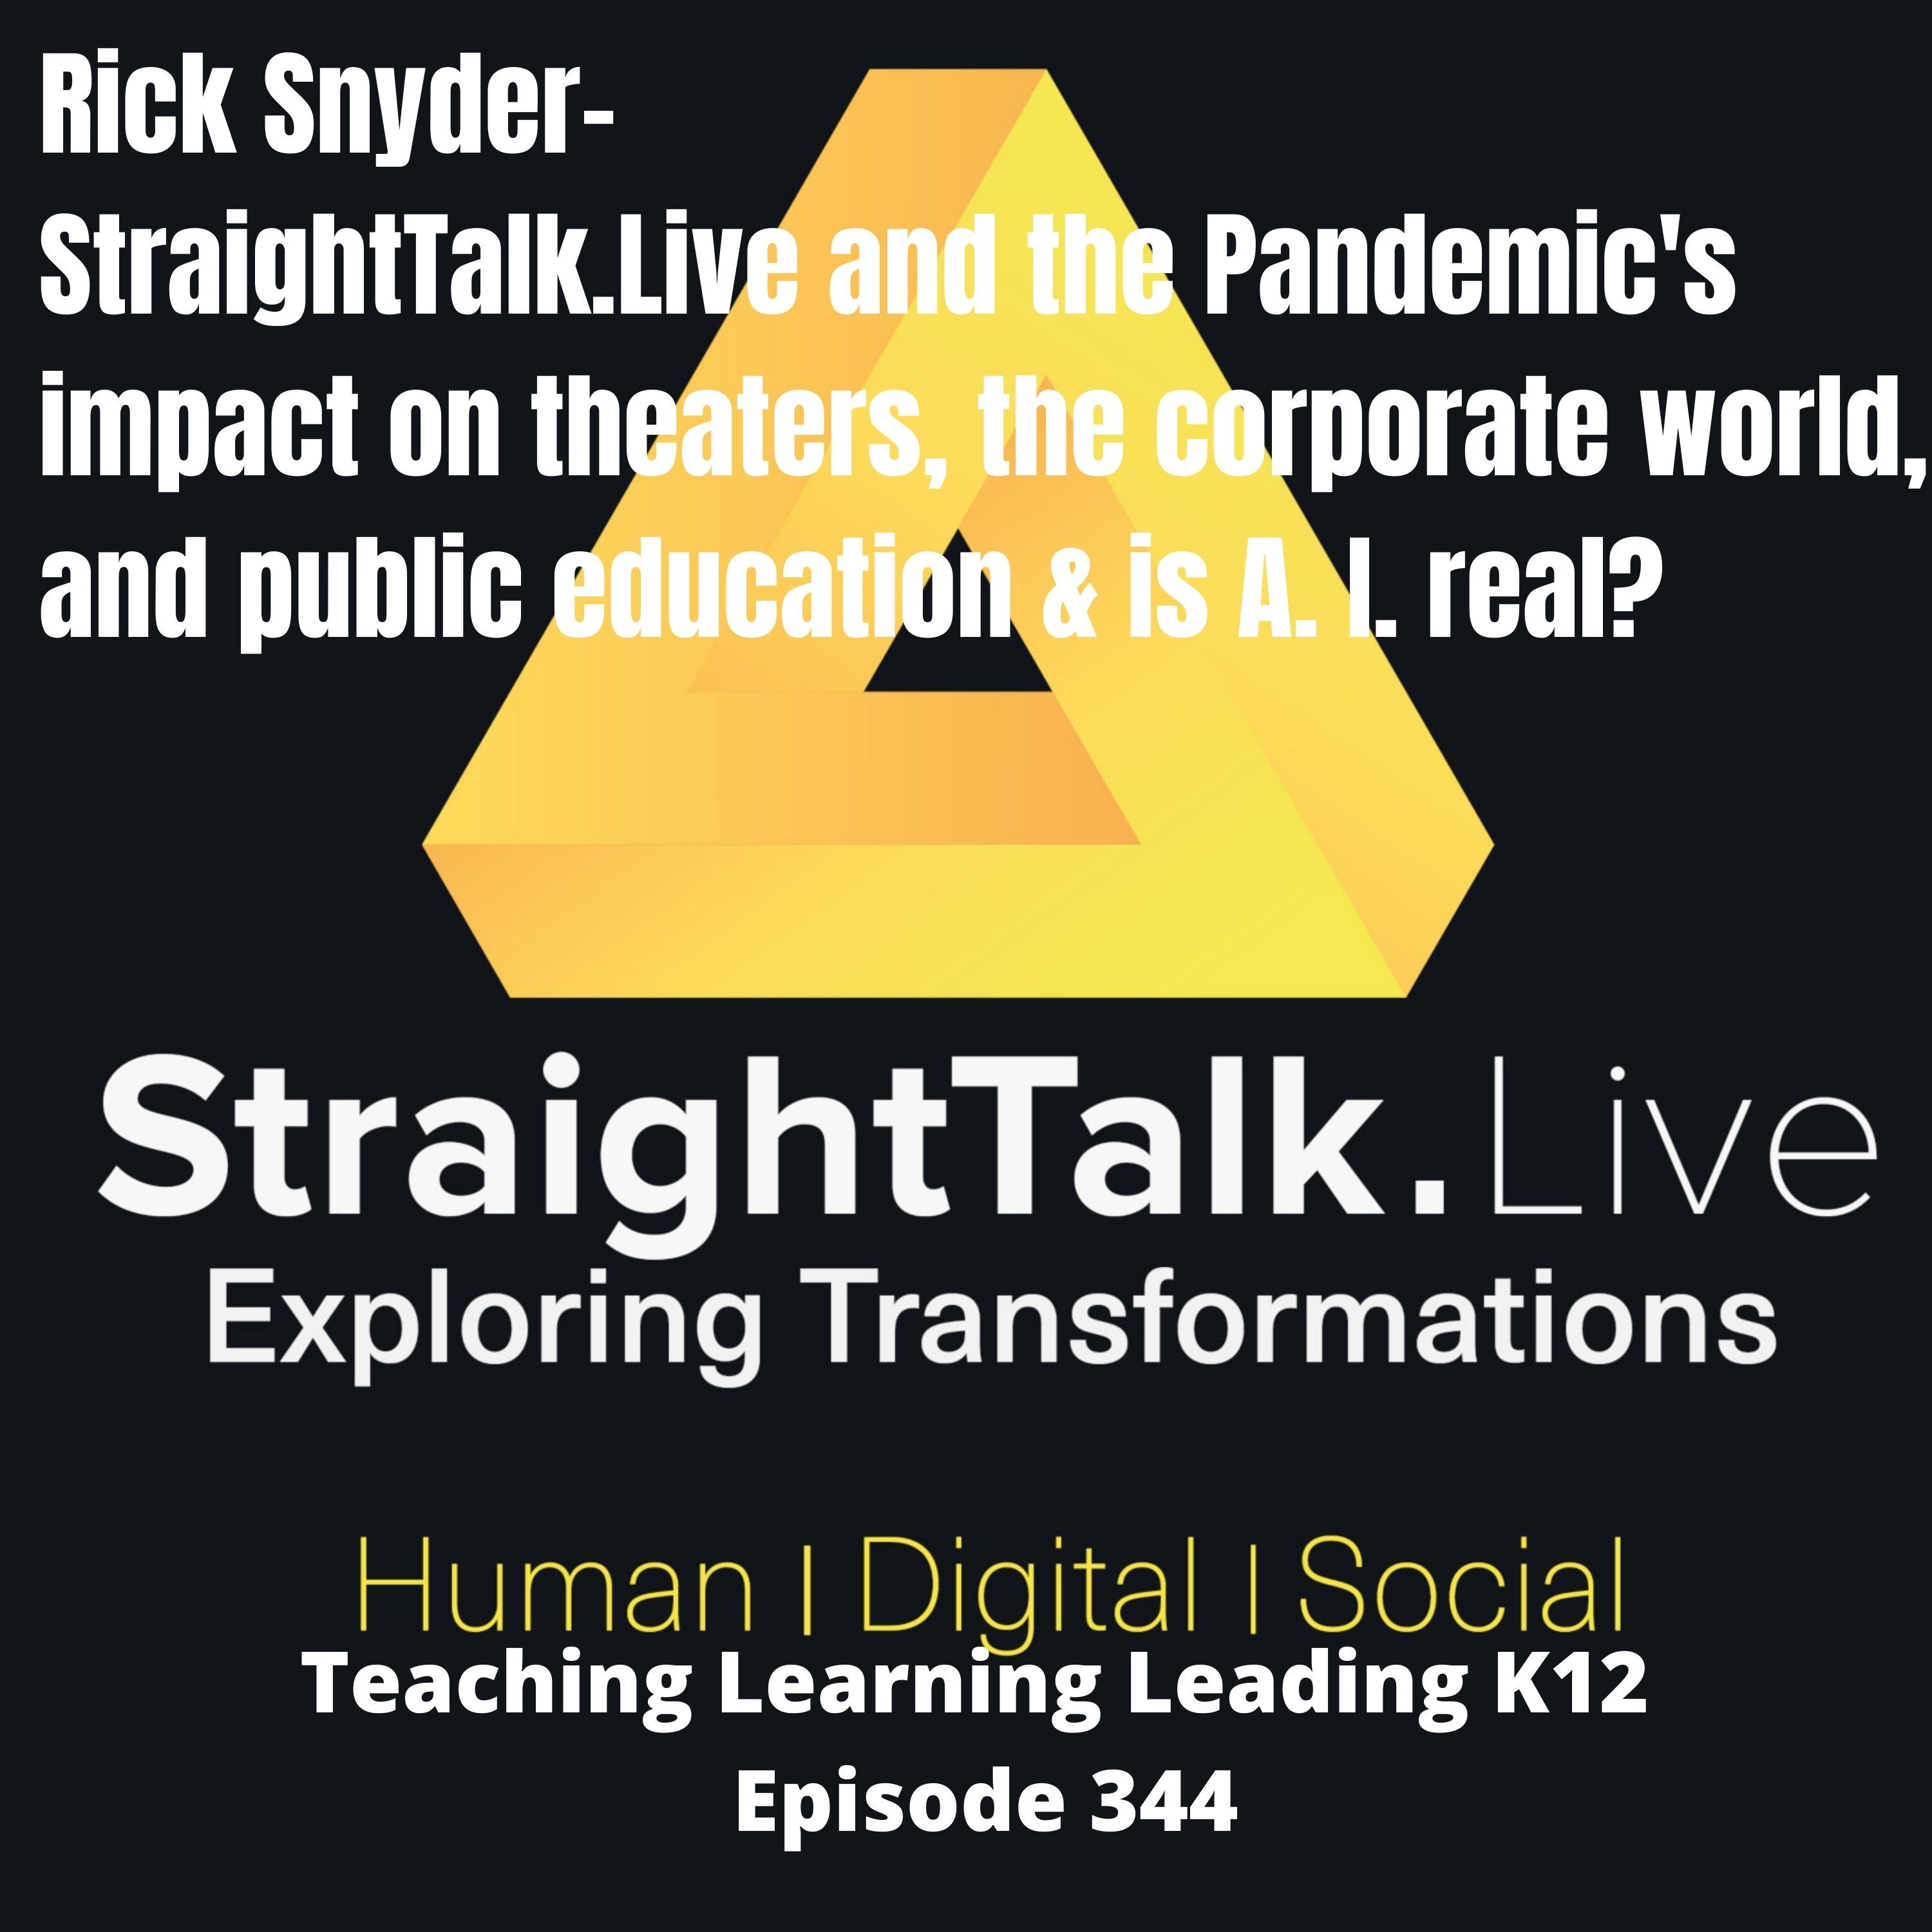 Rick Snyder: Straight Talk. Live  and some hot topics - Pandemic Impact on Theaters, Corporate World, and Education & Is A.I Real. - 344 Image